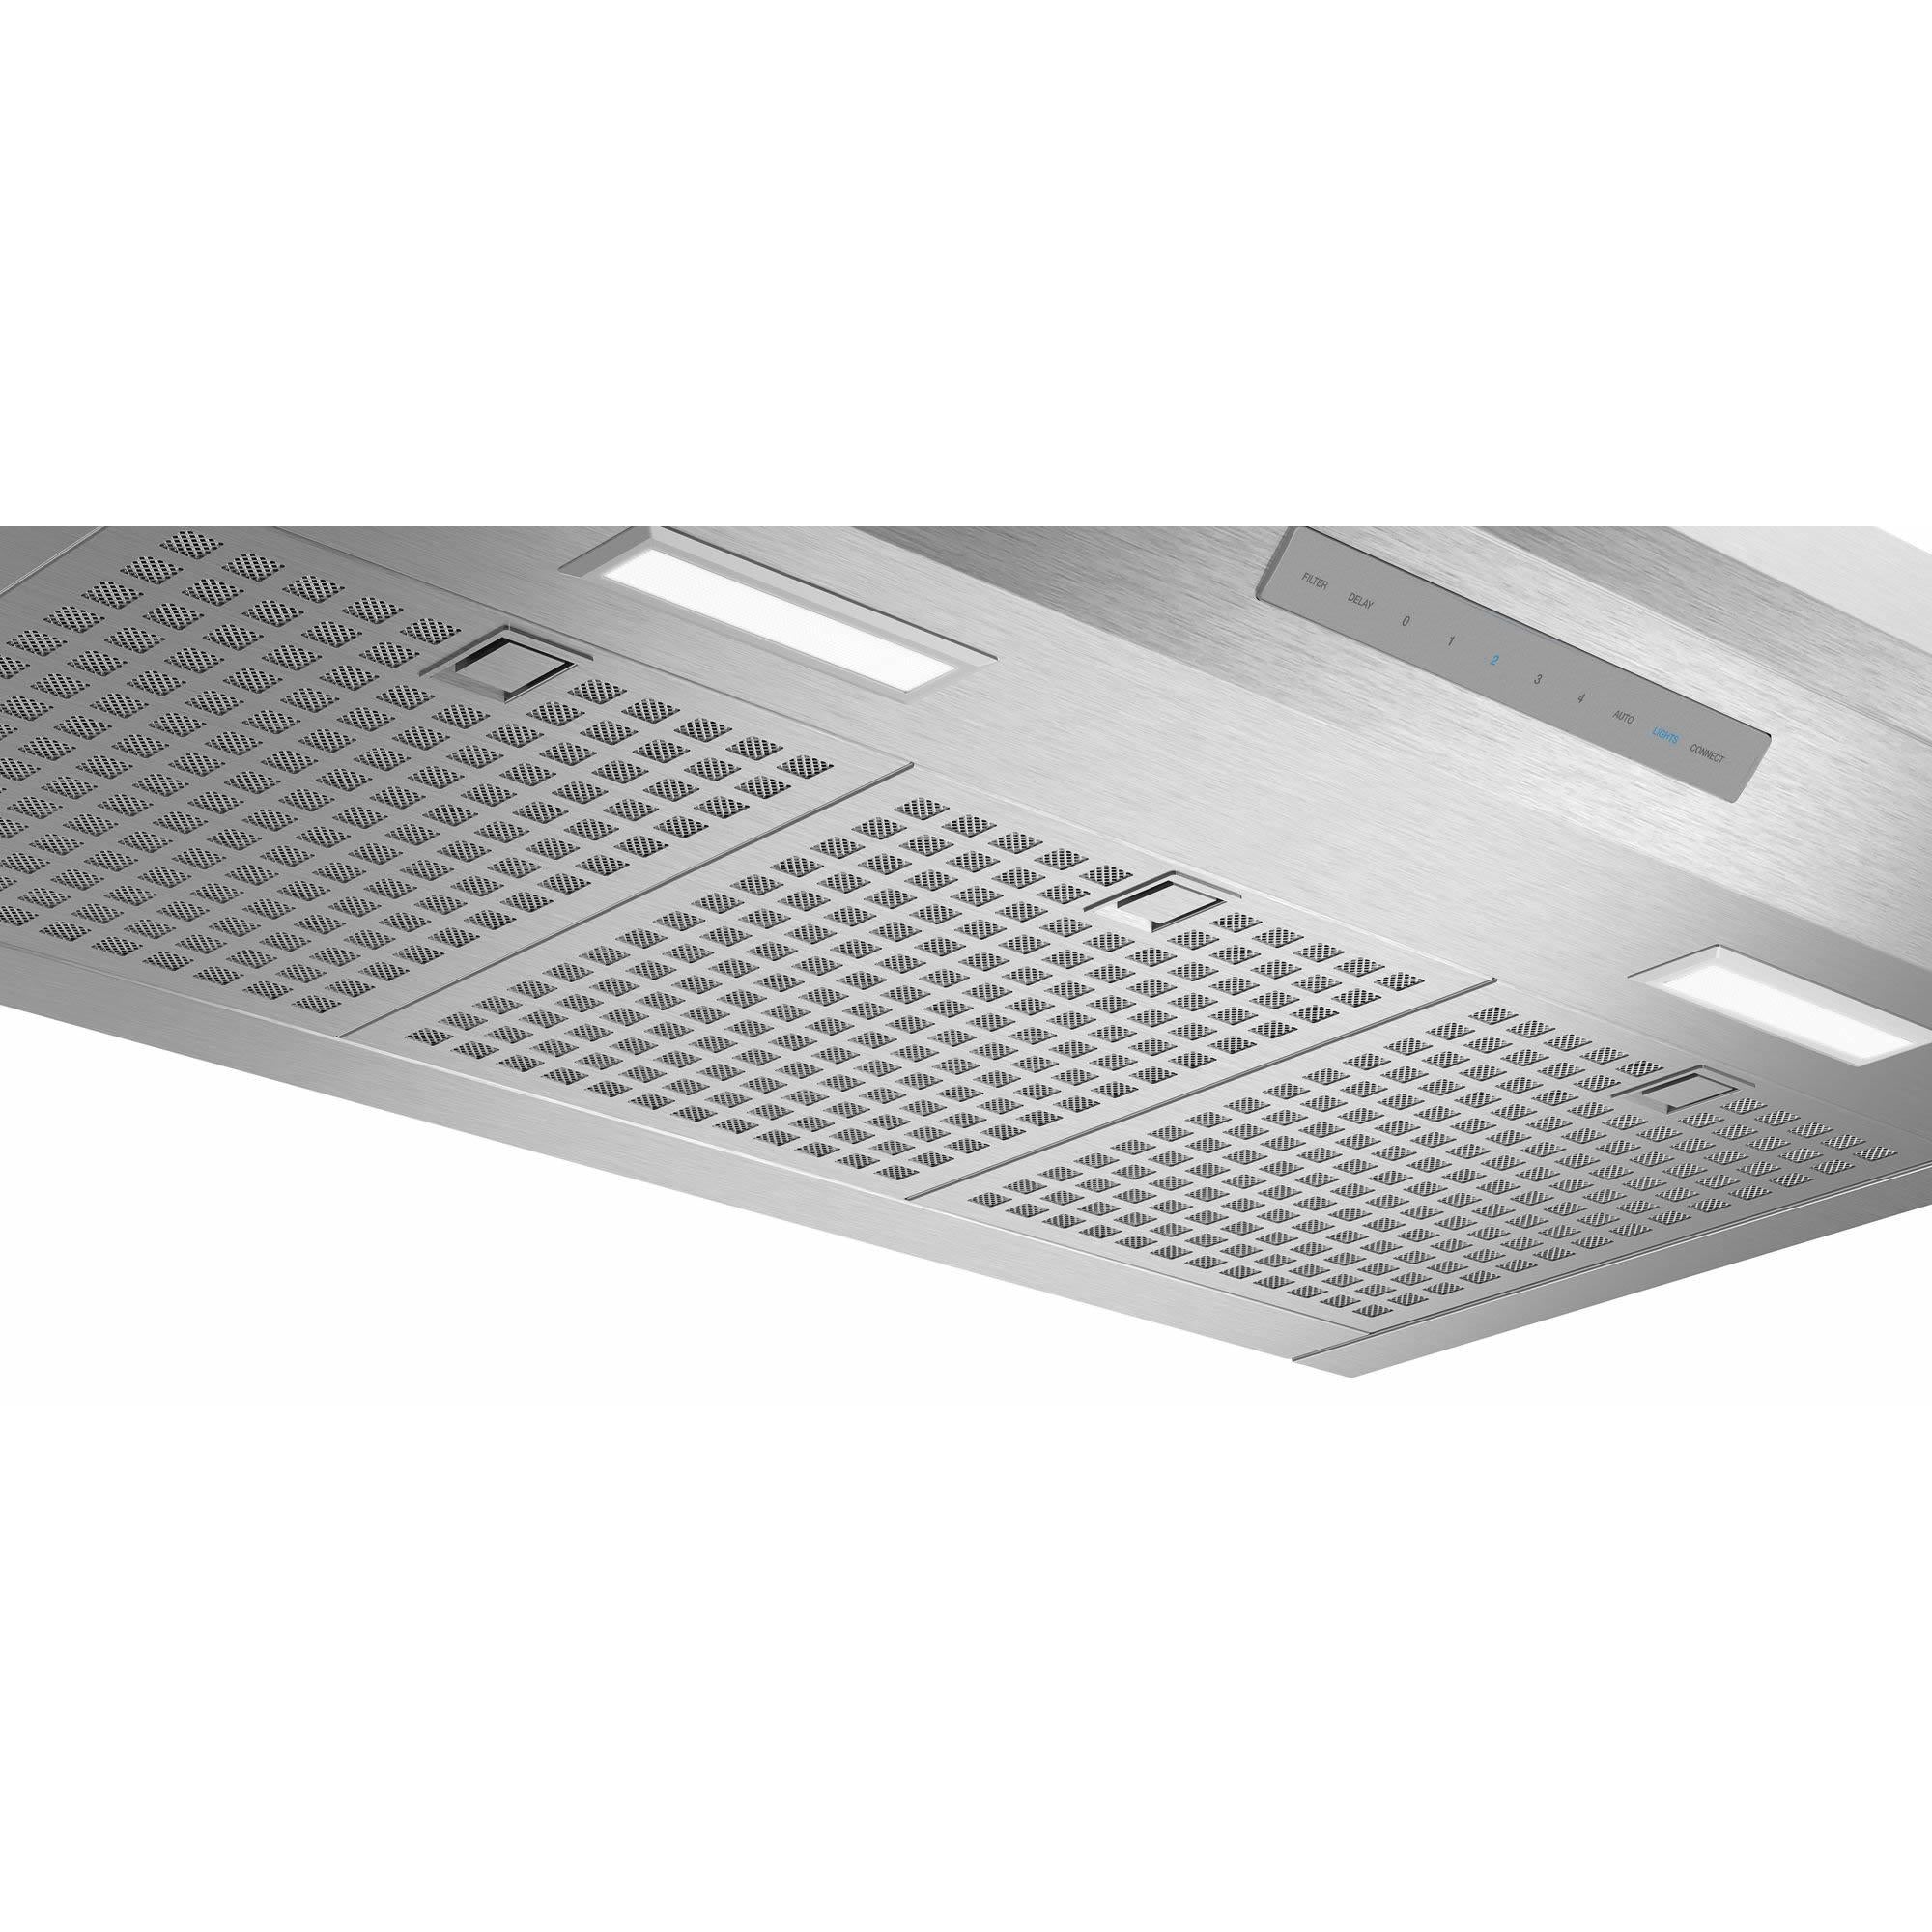 Thermador 36-inch Masterpiece? Series Wall Mount Range Hood HMCB36WS